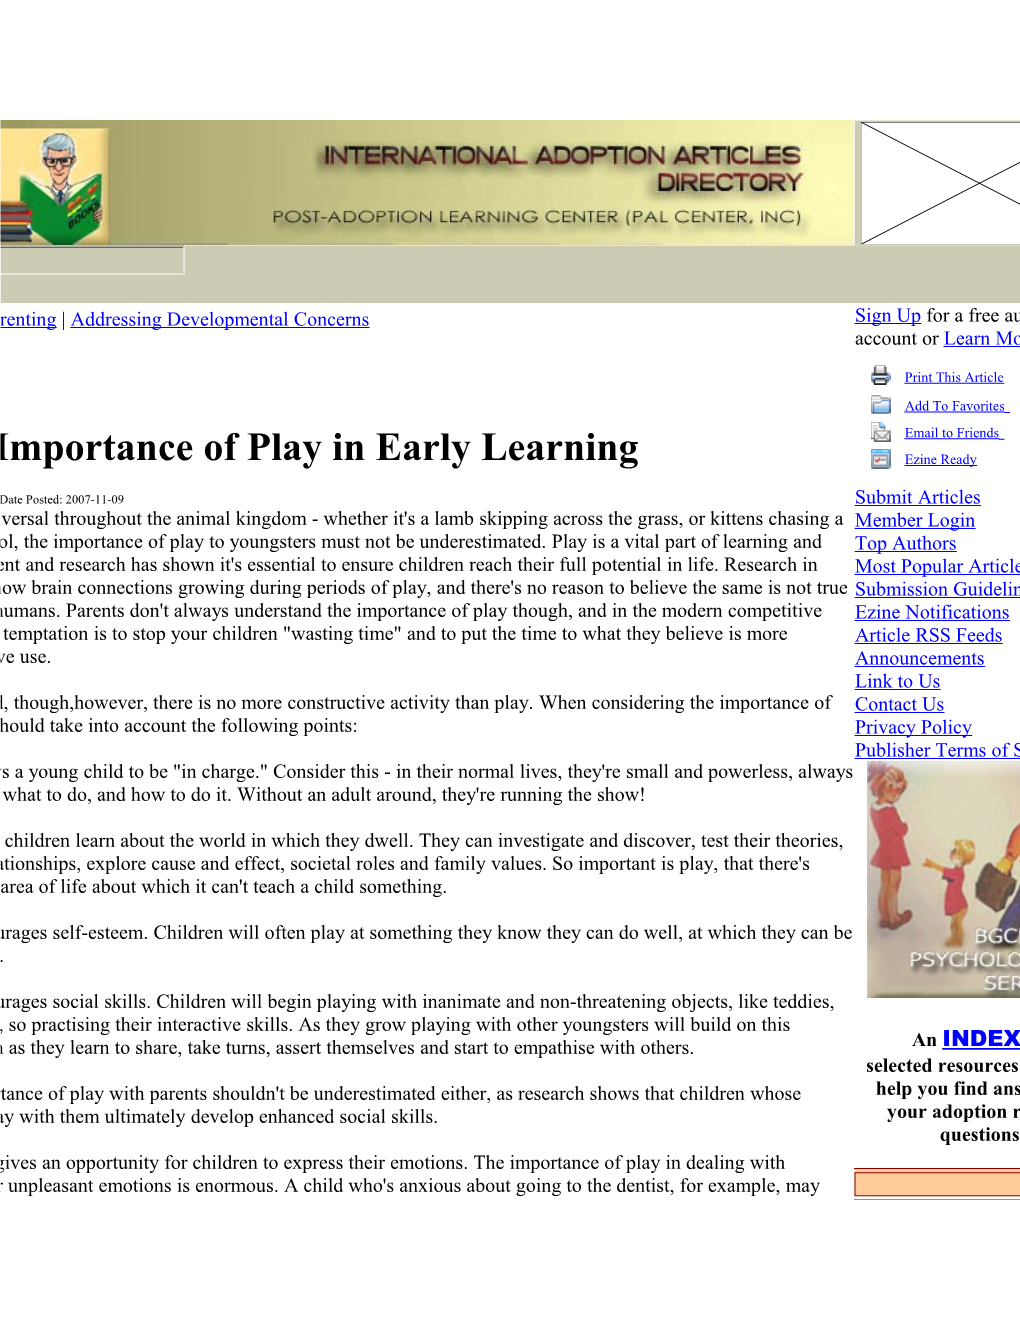 The Importance of Play in Early Learning